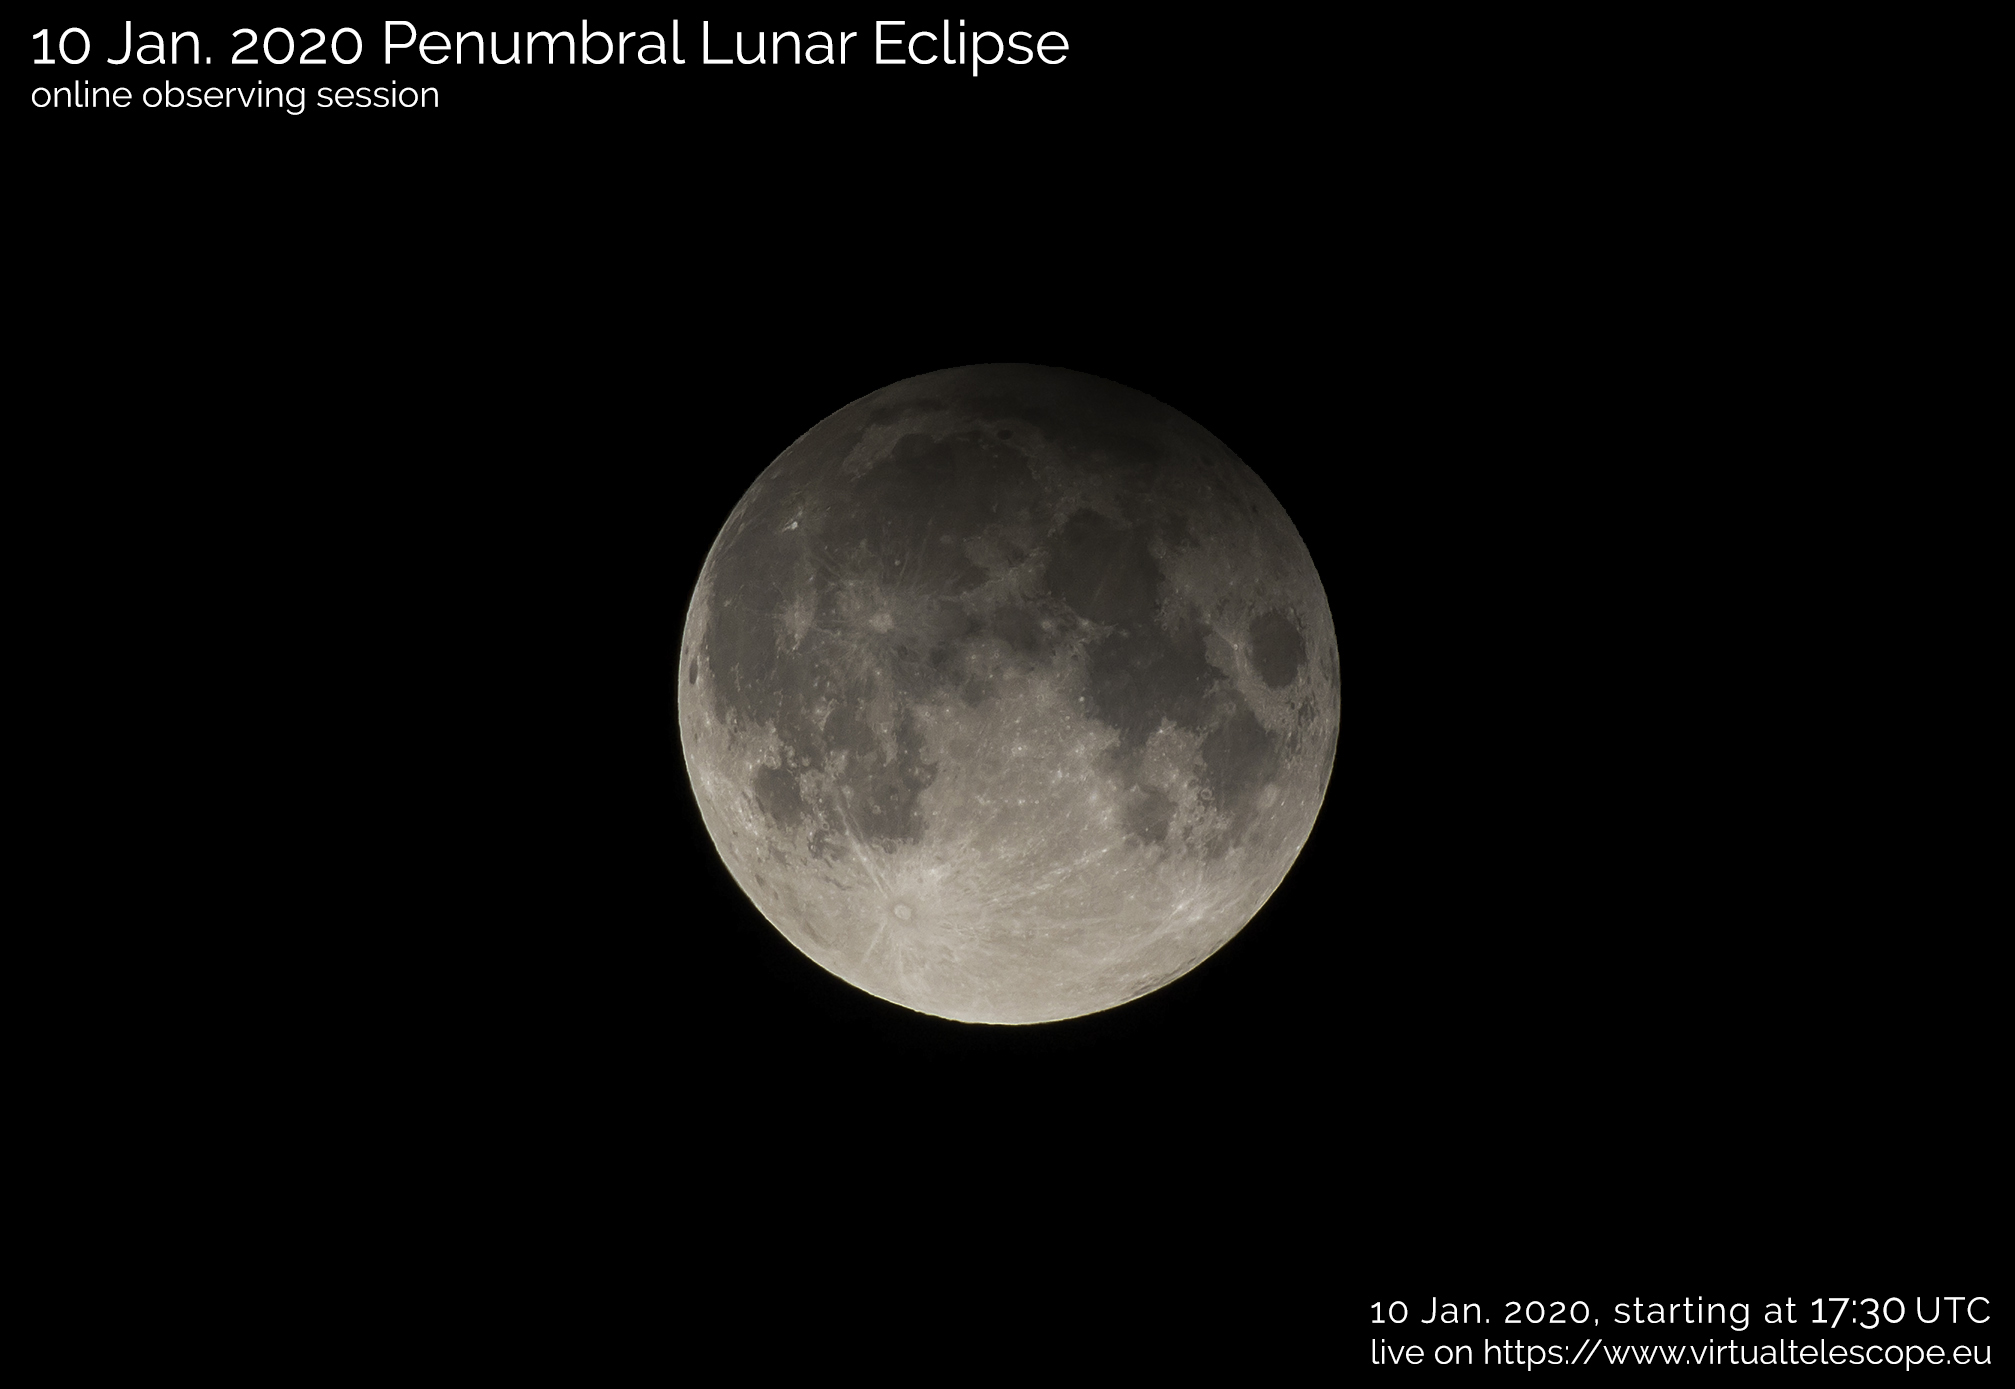 The 10 Jan. 2020 penumbral lunar eclipse - poster of the event